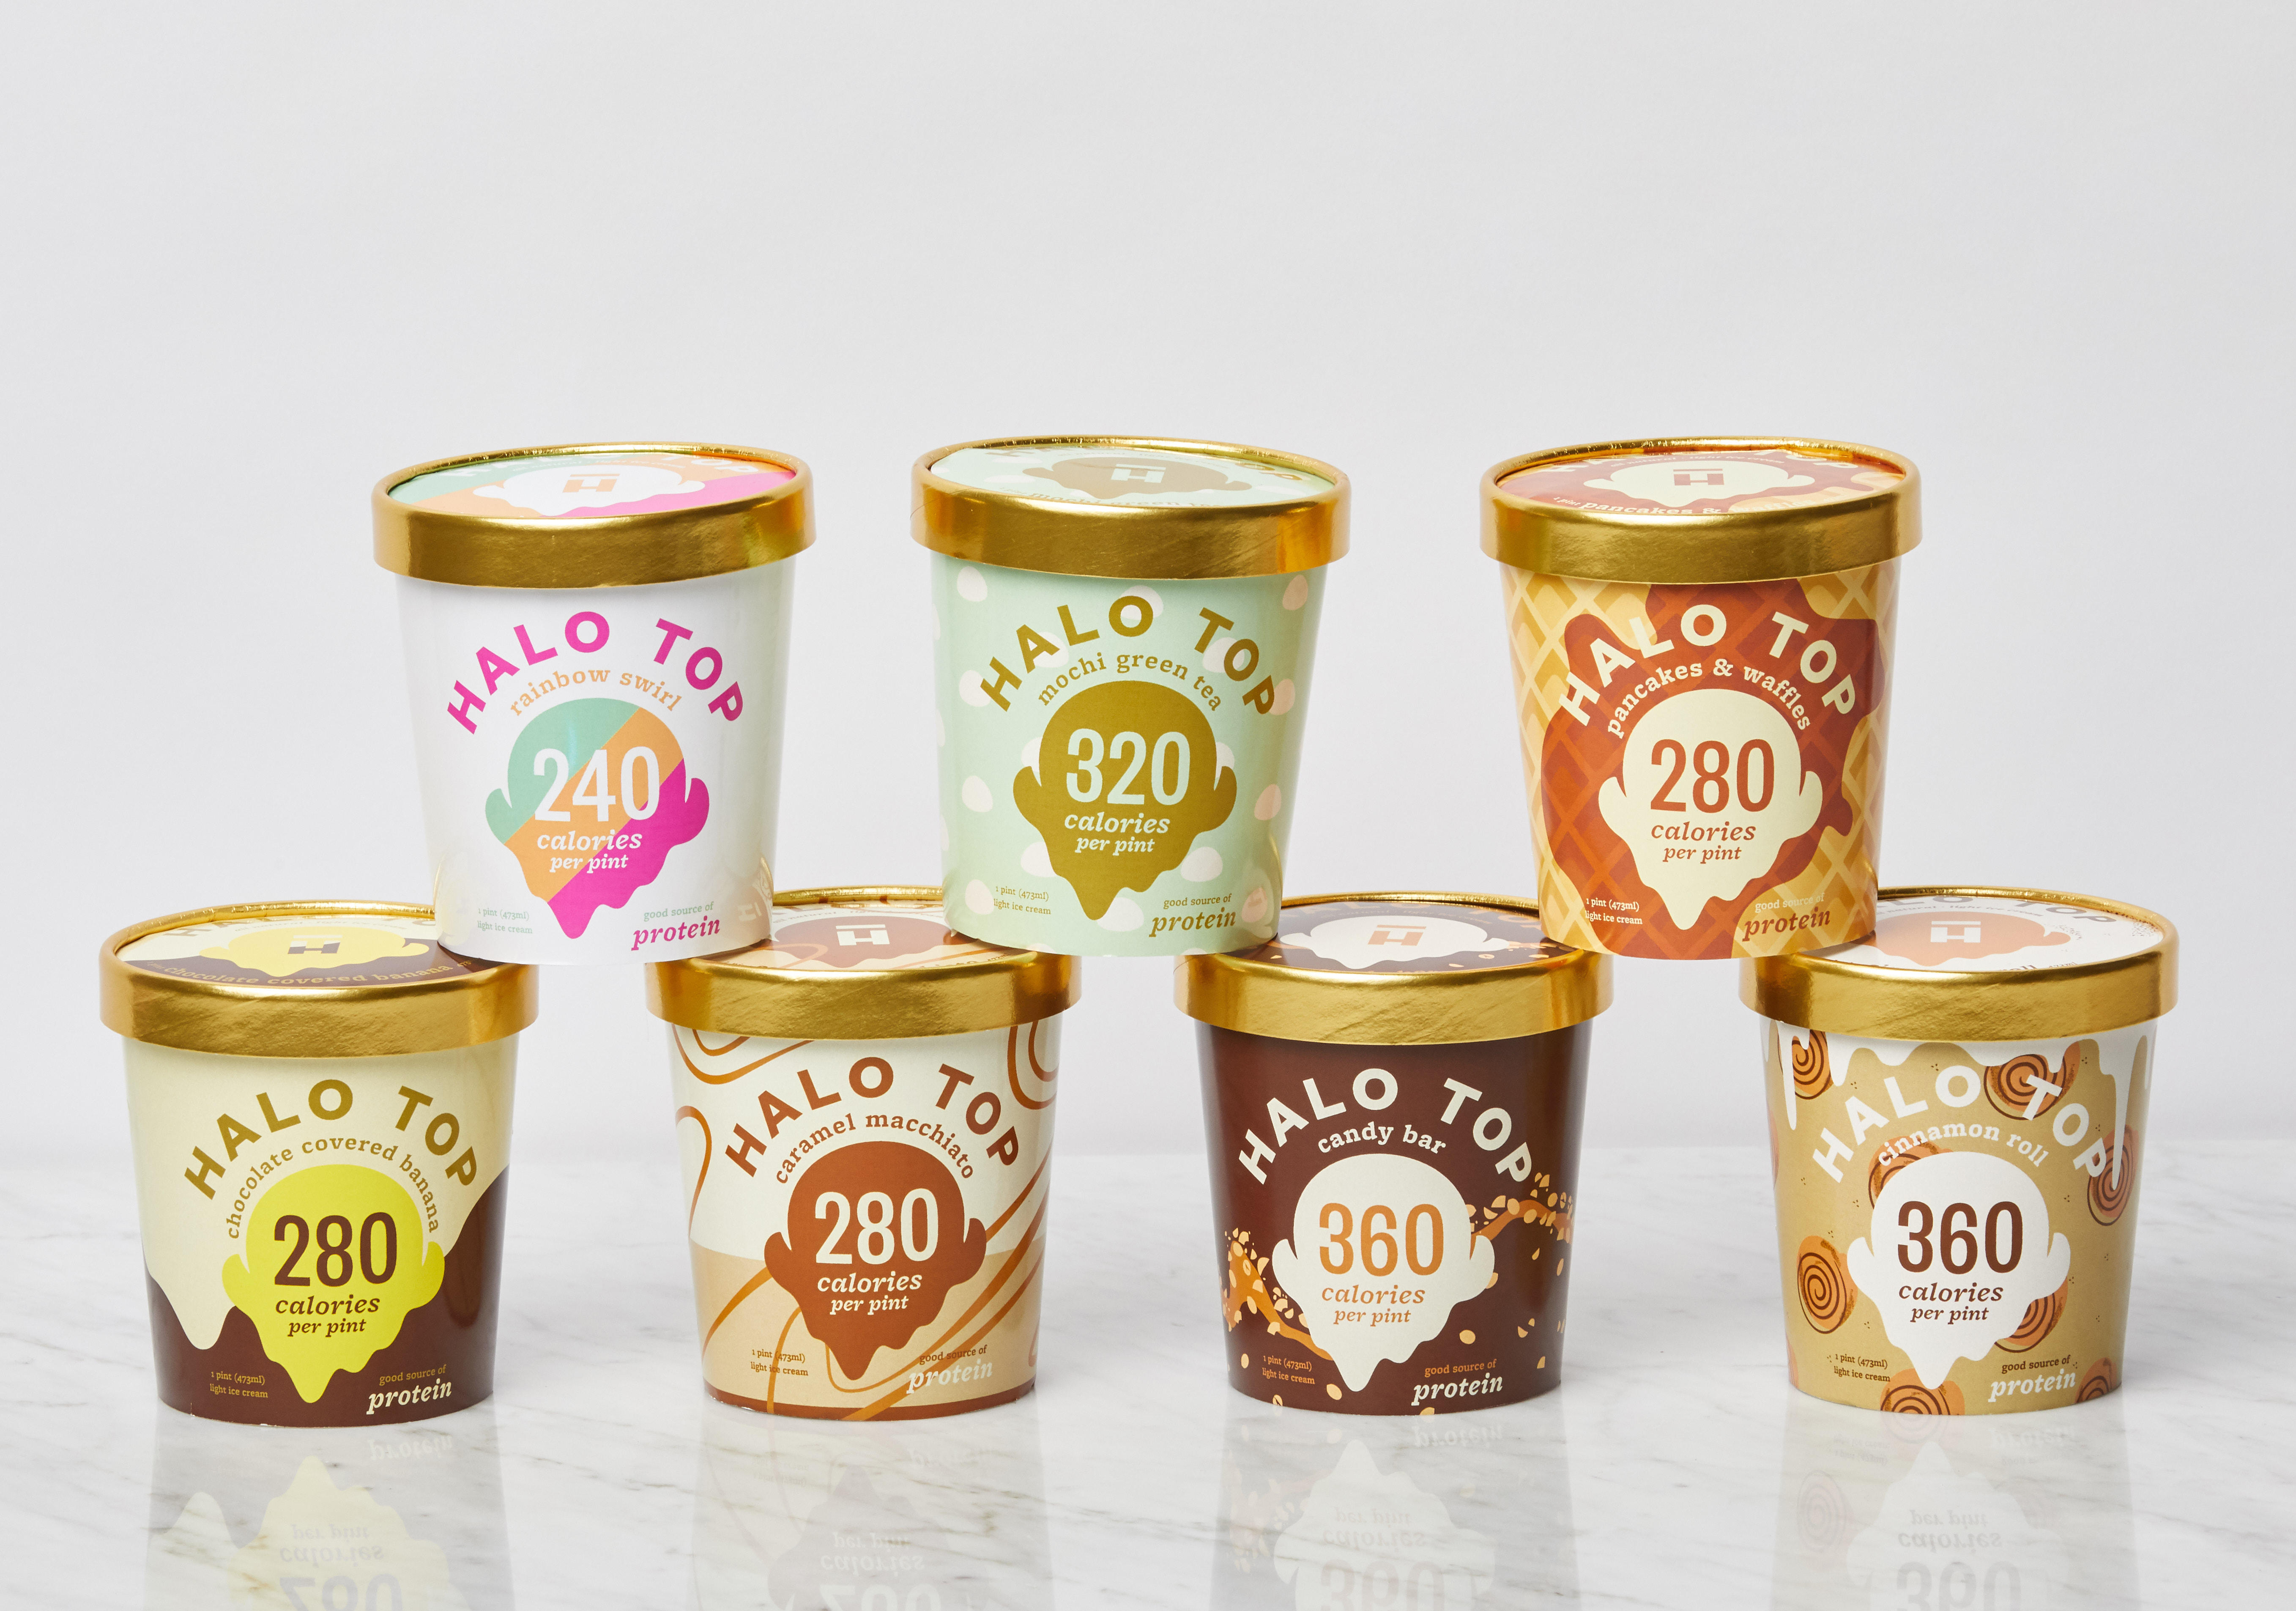 Halo Top: Pancakes & Waffles Among New Ice Cream Flavors | Time Ice Cream Flavors Pictures